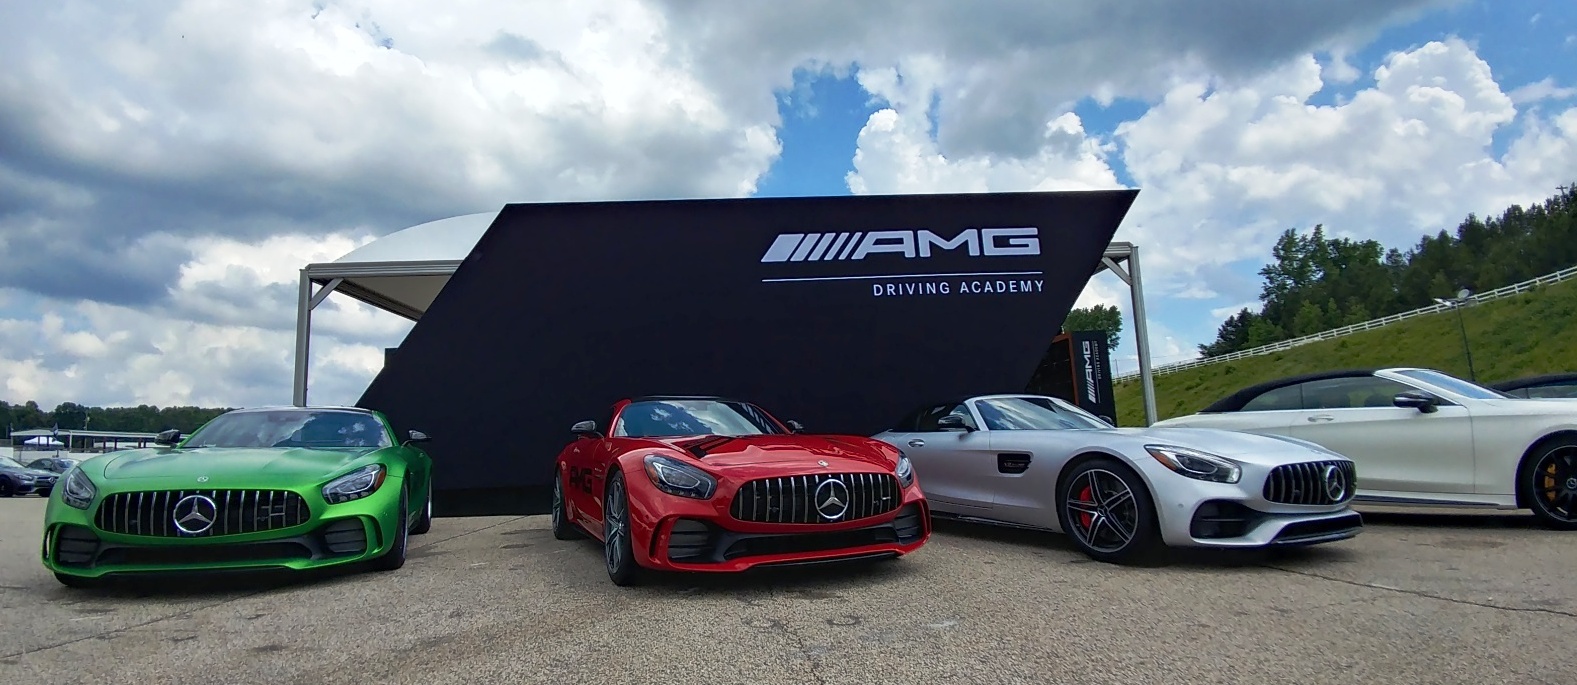 Benzblogger Amg Driving Academy